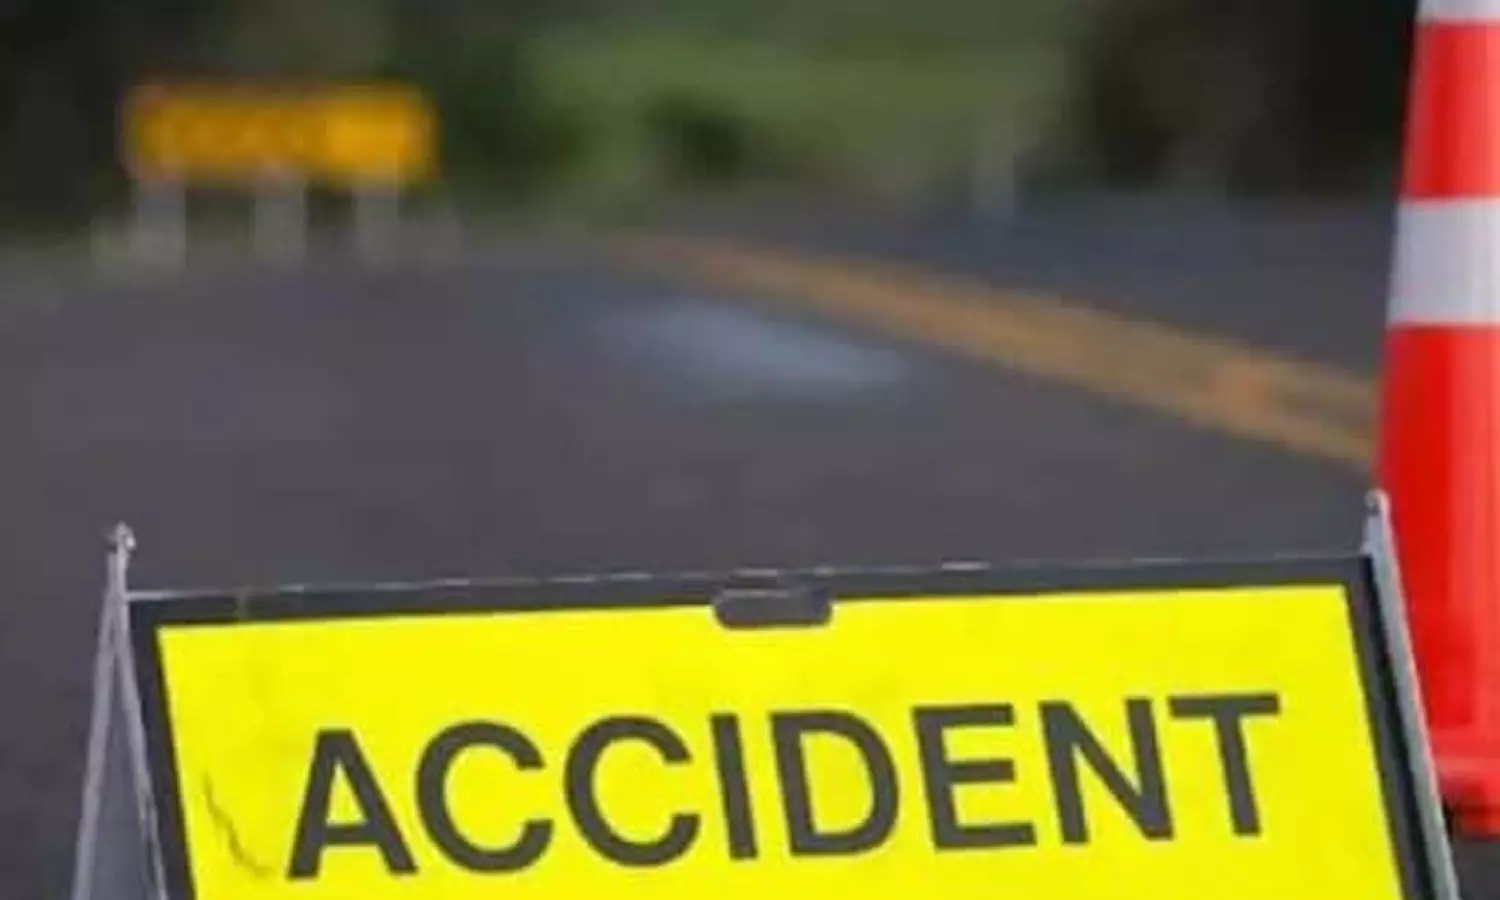 Lorry carrying fertilizers hit a car at Moodapalli, two killed, two injured